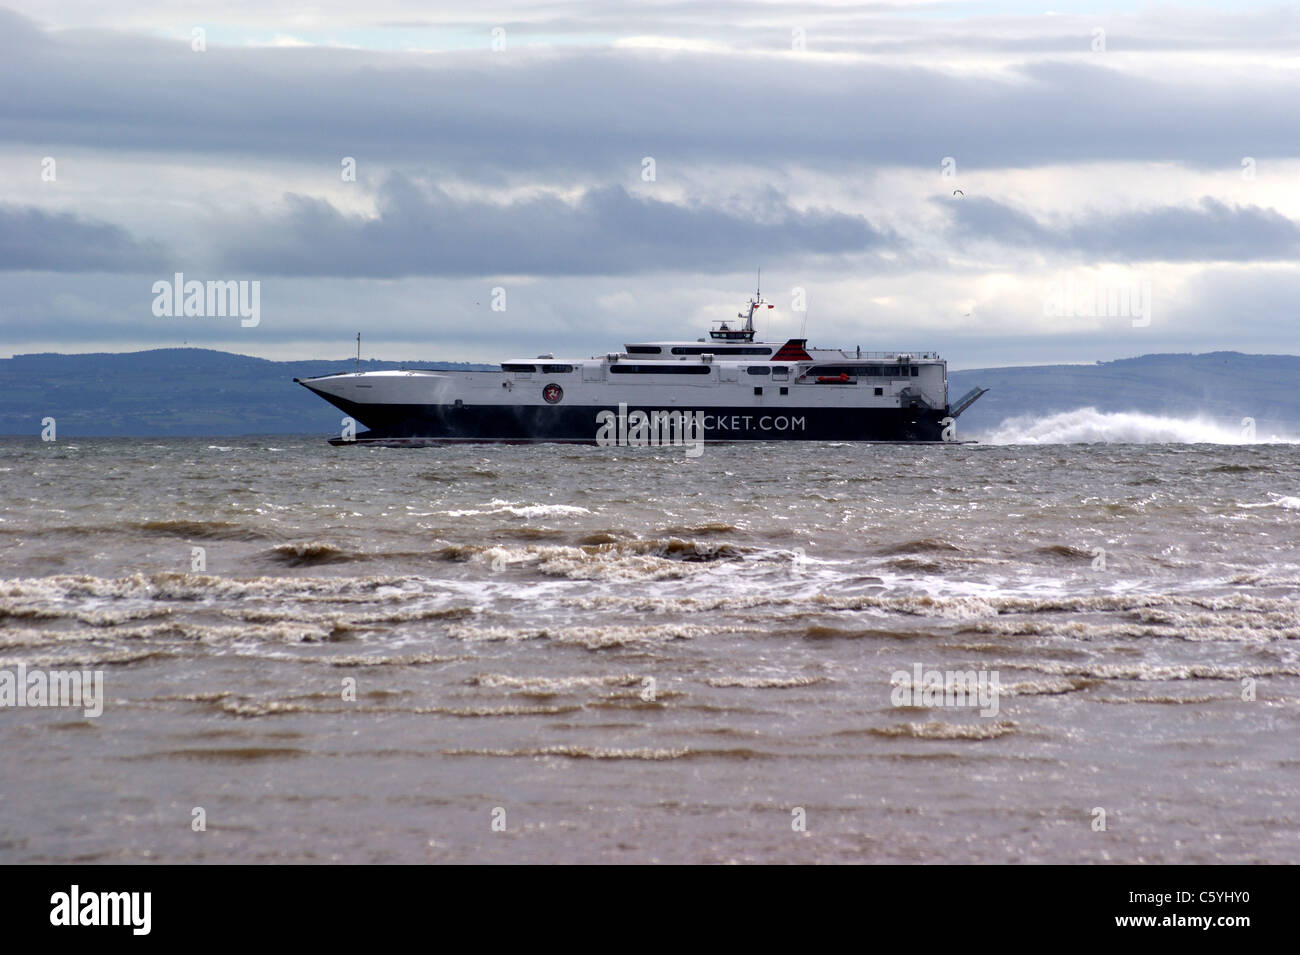 The Isle of Man ferry seen from Crosby beach, Liverpool, Merseyside, England Stock Photo